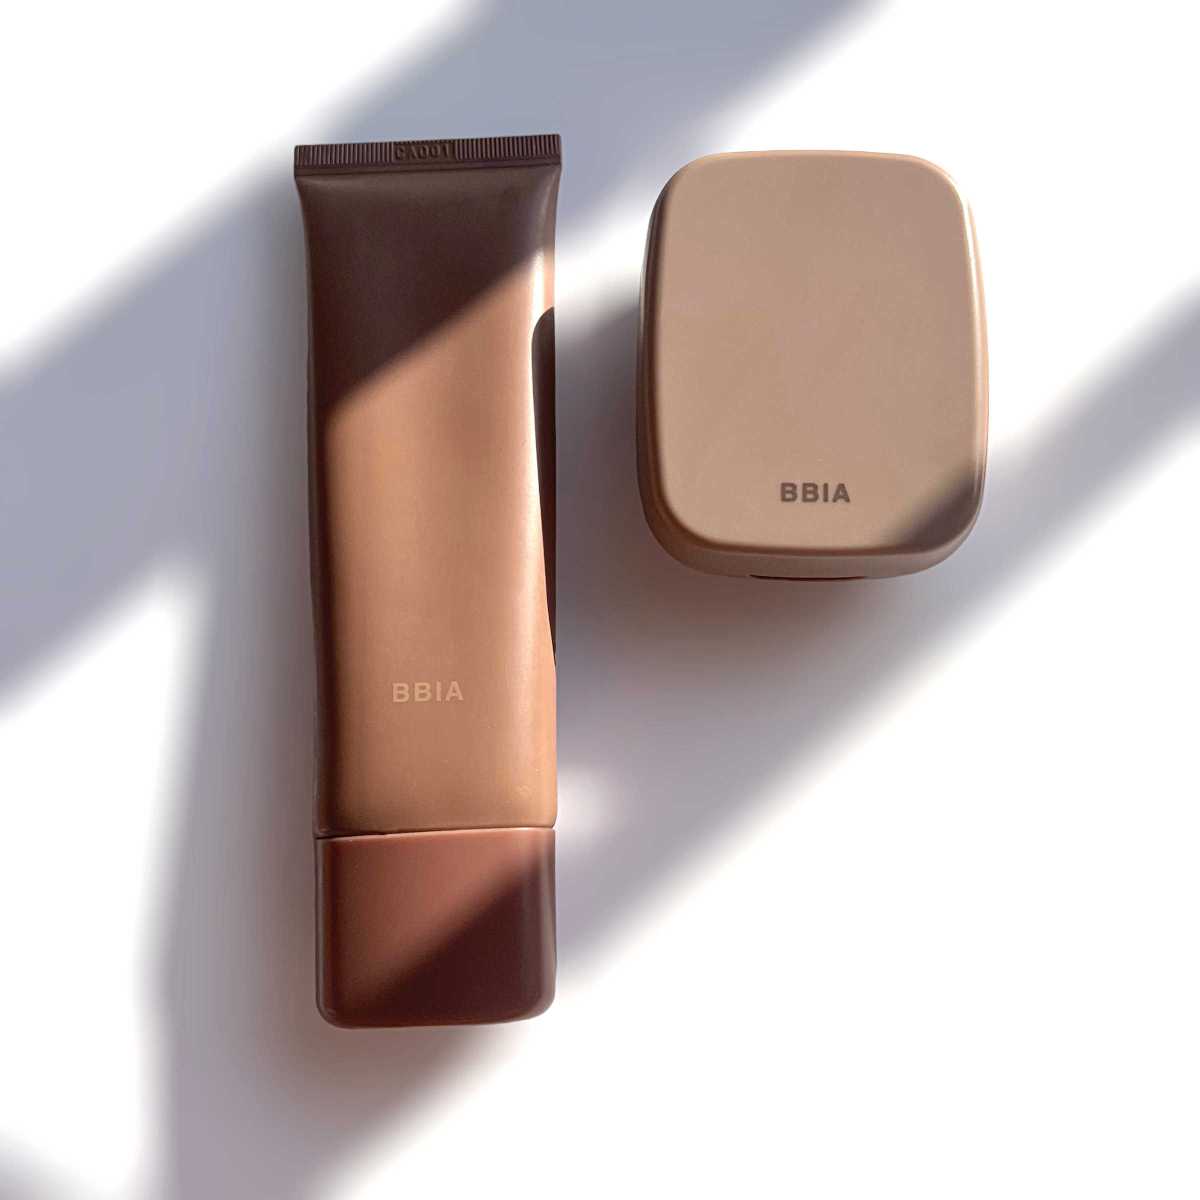 BBIA Last Skin and Last Sebum Foundation Reviews – Unboxing Beauty